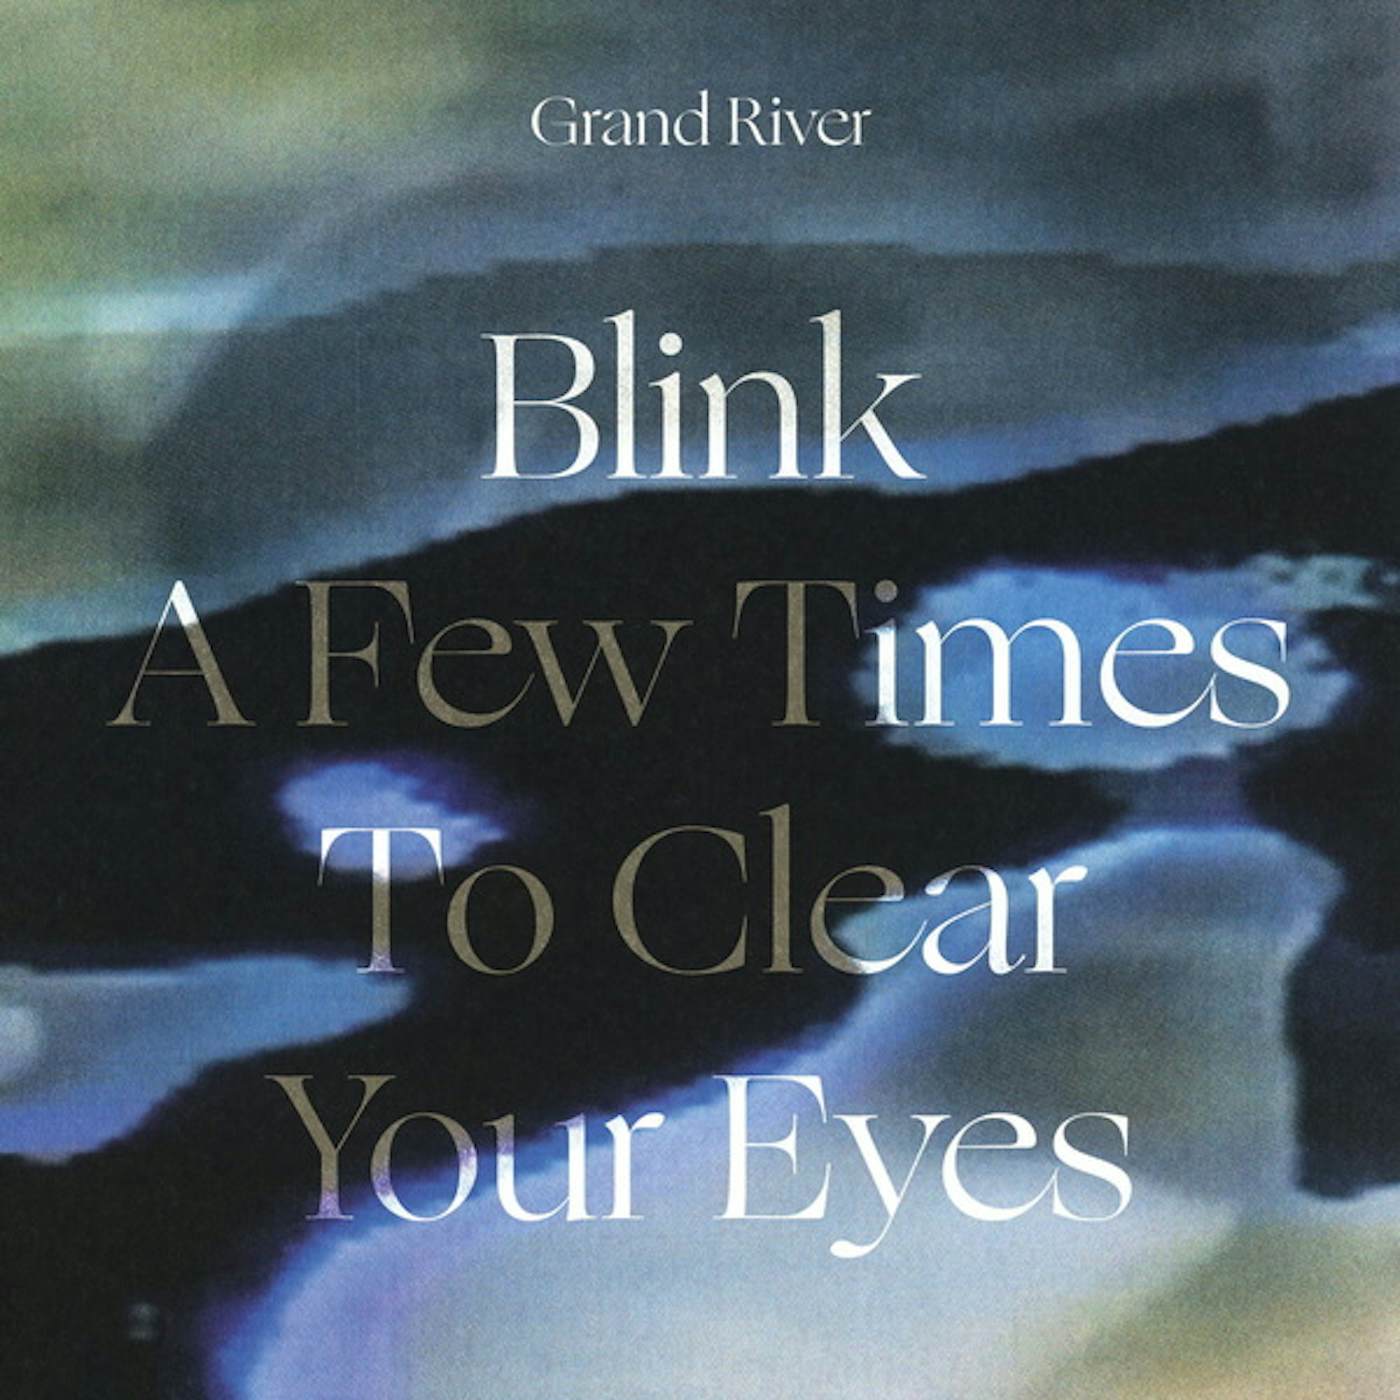 Grand River Blink a Few Times to Clear Your Eyes Vinyl Record